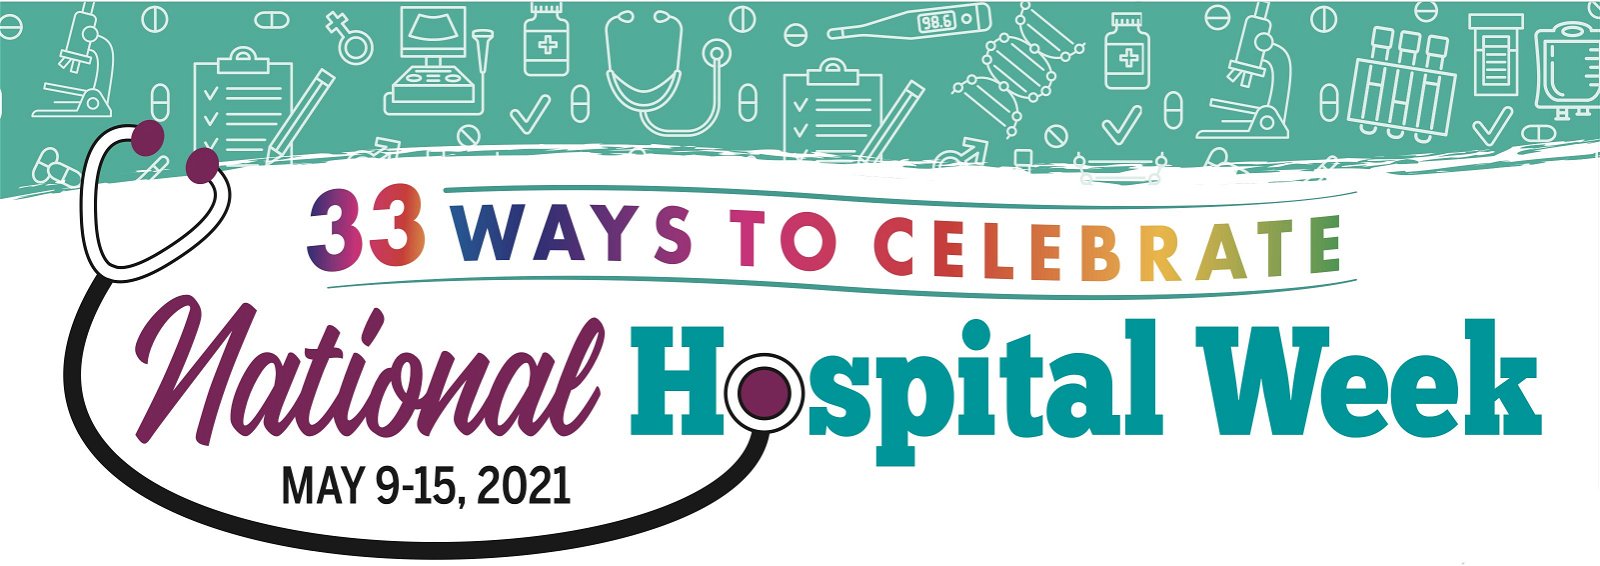 Positive Promotions Download Our 33 Ways To Celebrate National